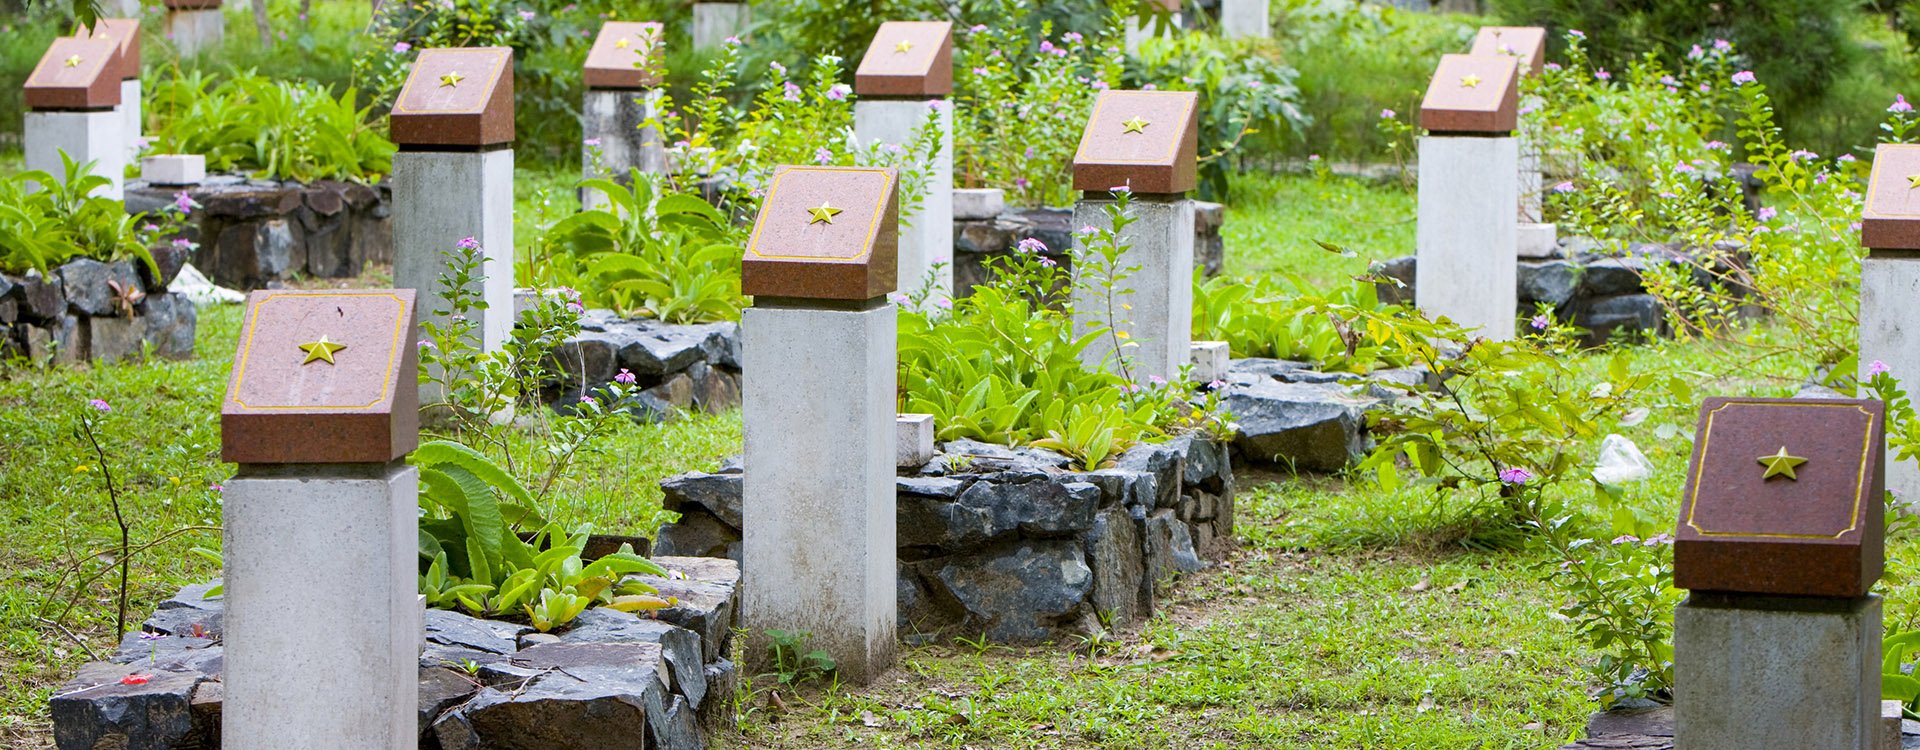 Cemetery to remember the rebels and prisoners who died at the prisons on Con Dao Island, Vietnam